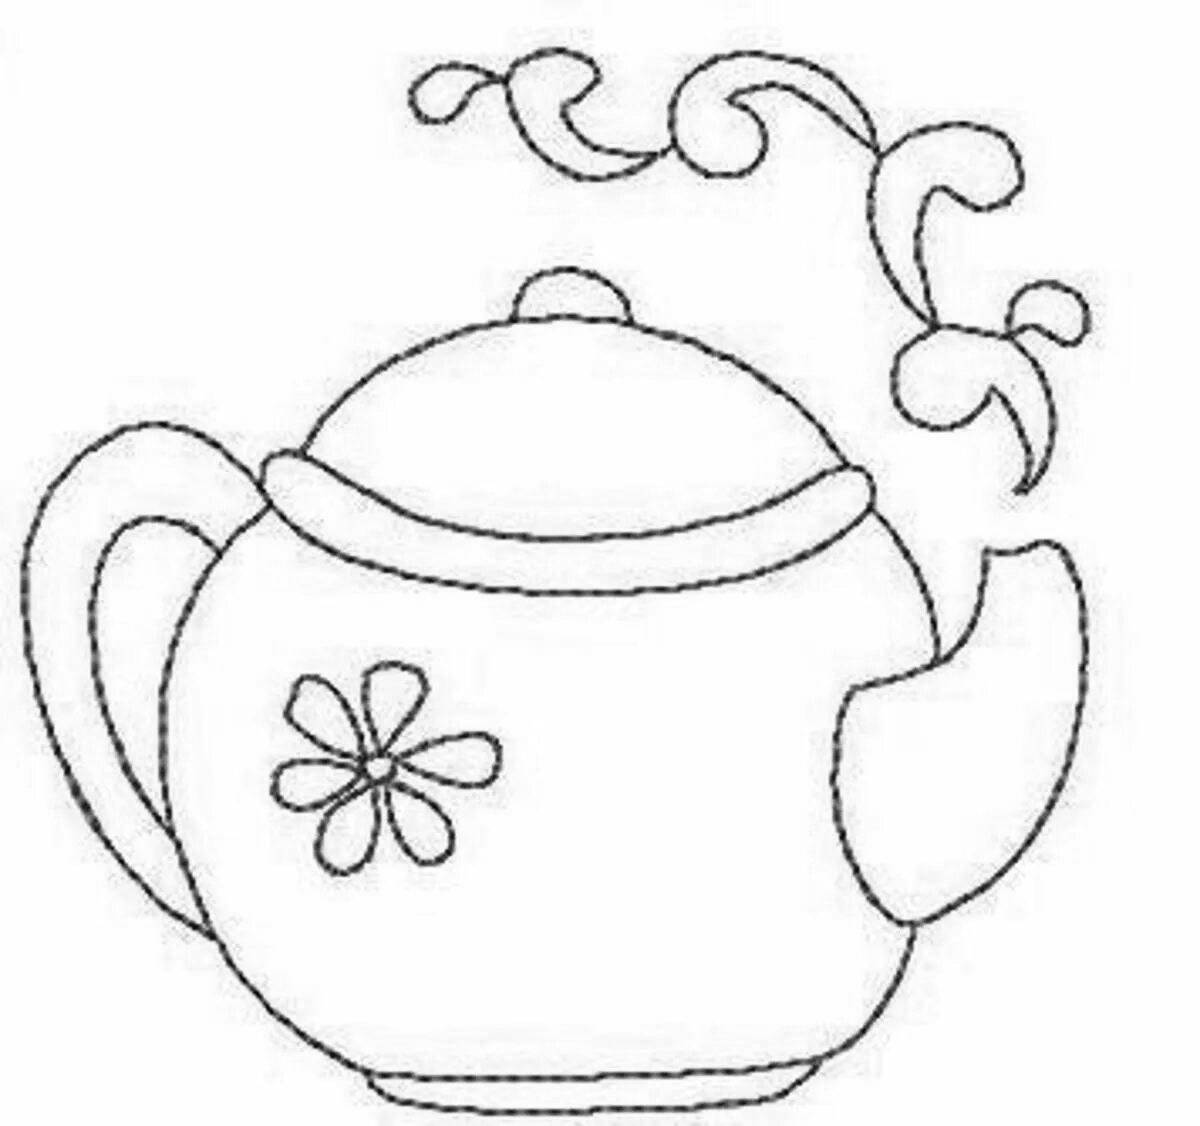 Adorable teapot coloring book for 3-4 year olds